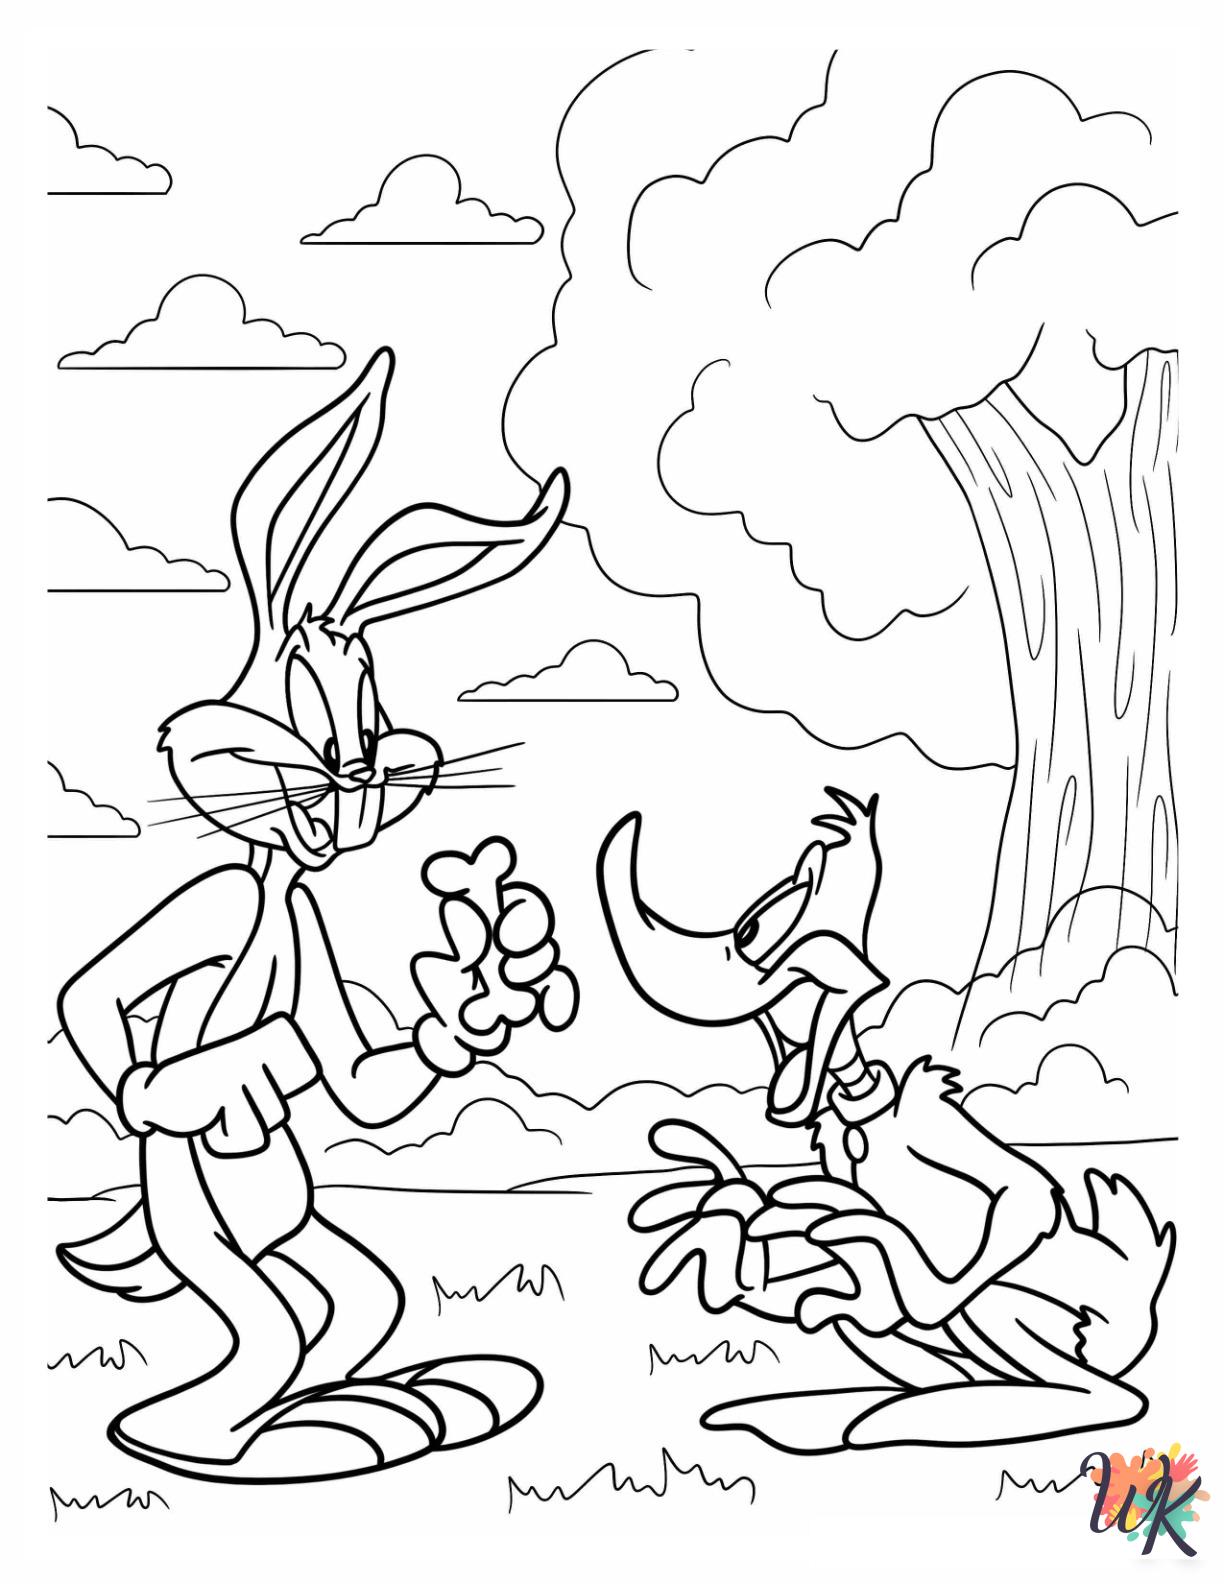 Bugs Bunny coloring pages for adults easy